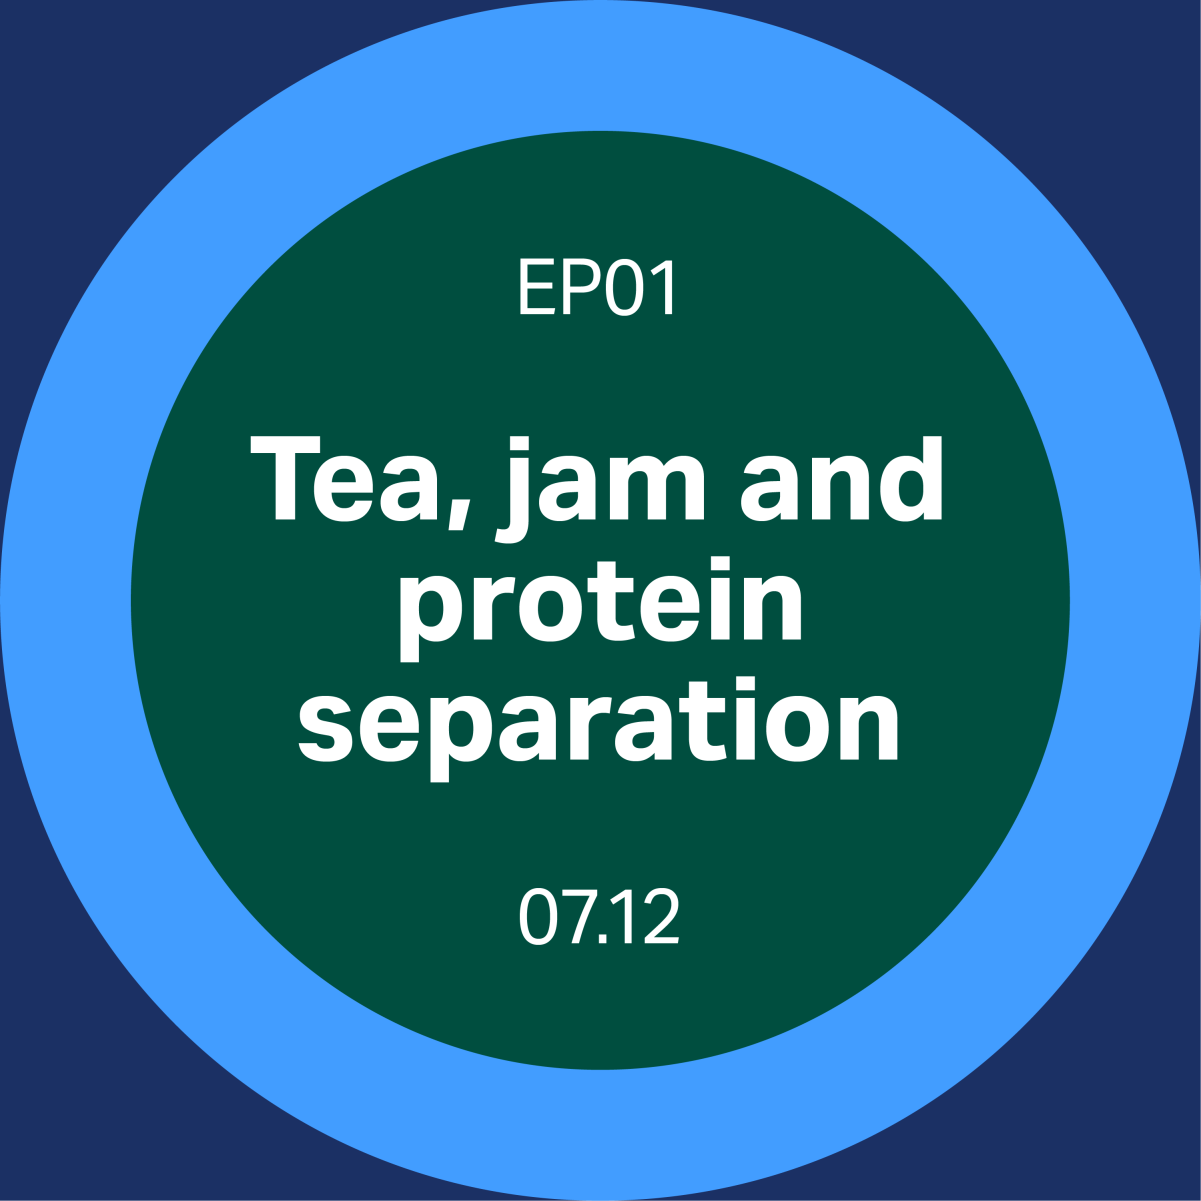 Tea, jam and protein separation